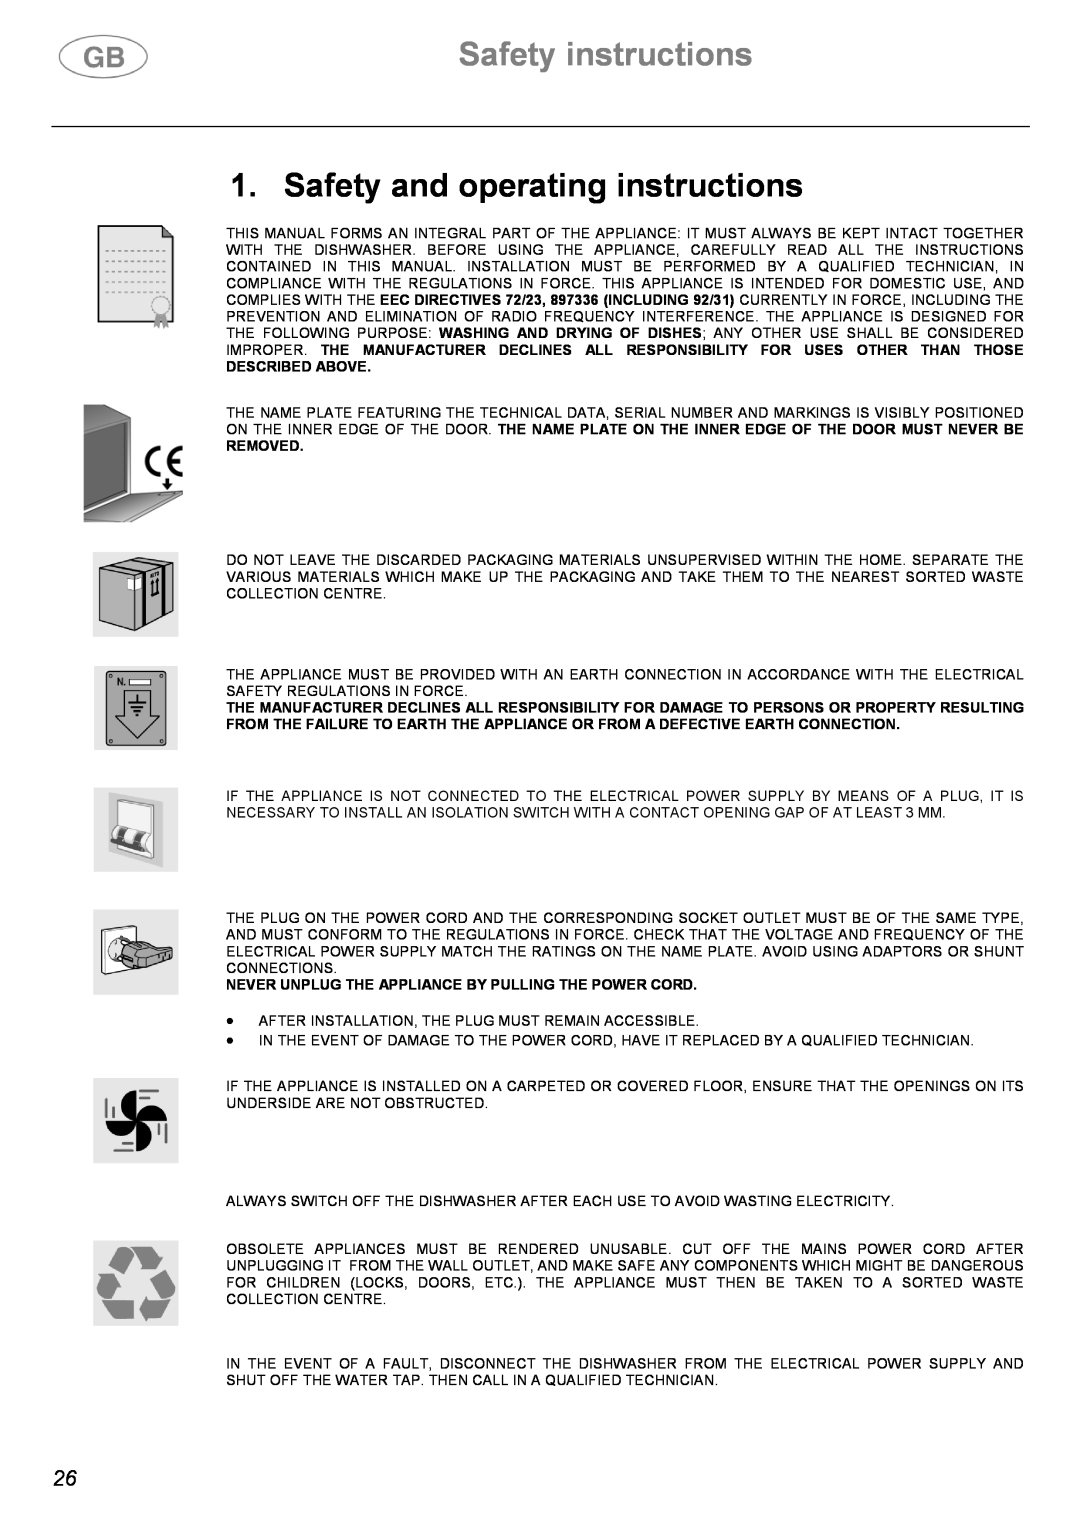 Smeg DW612ST instruction manual Safety instructions, Safety and operating instructions, Described Above, Removed 